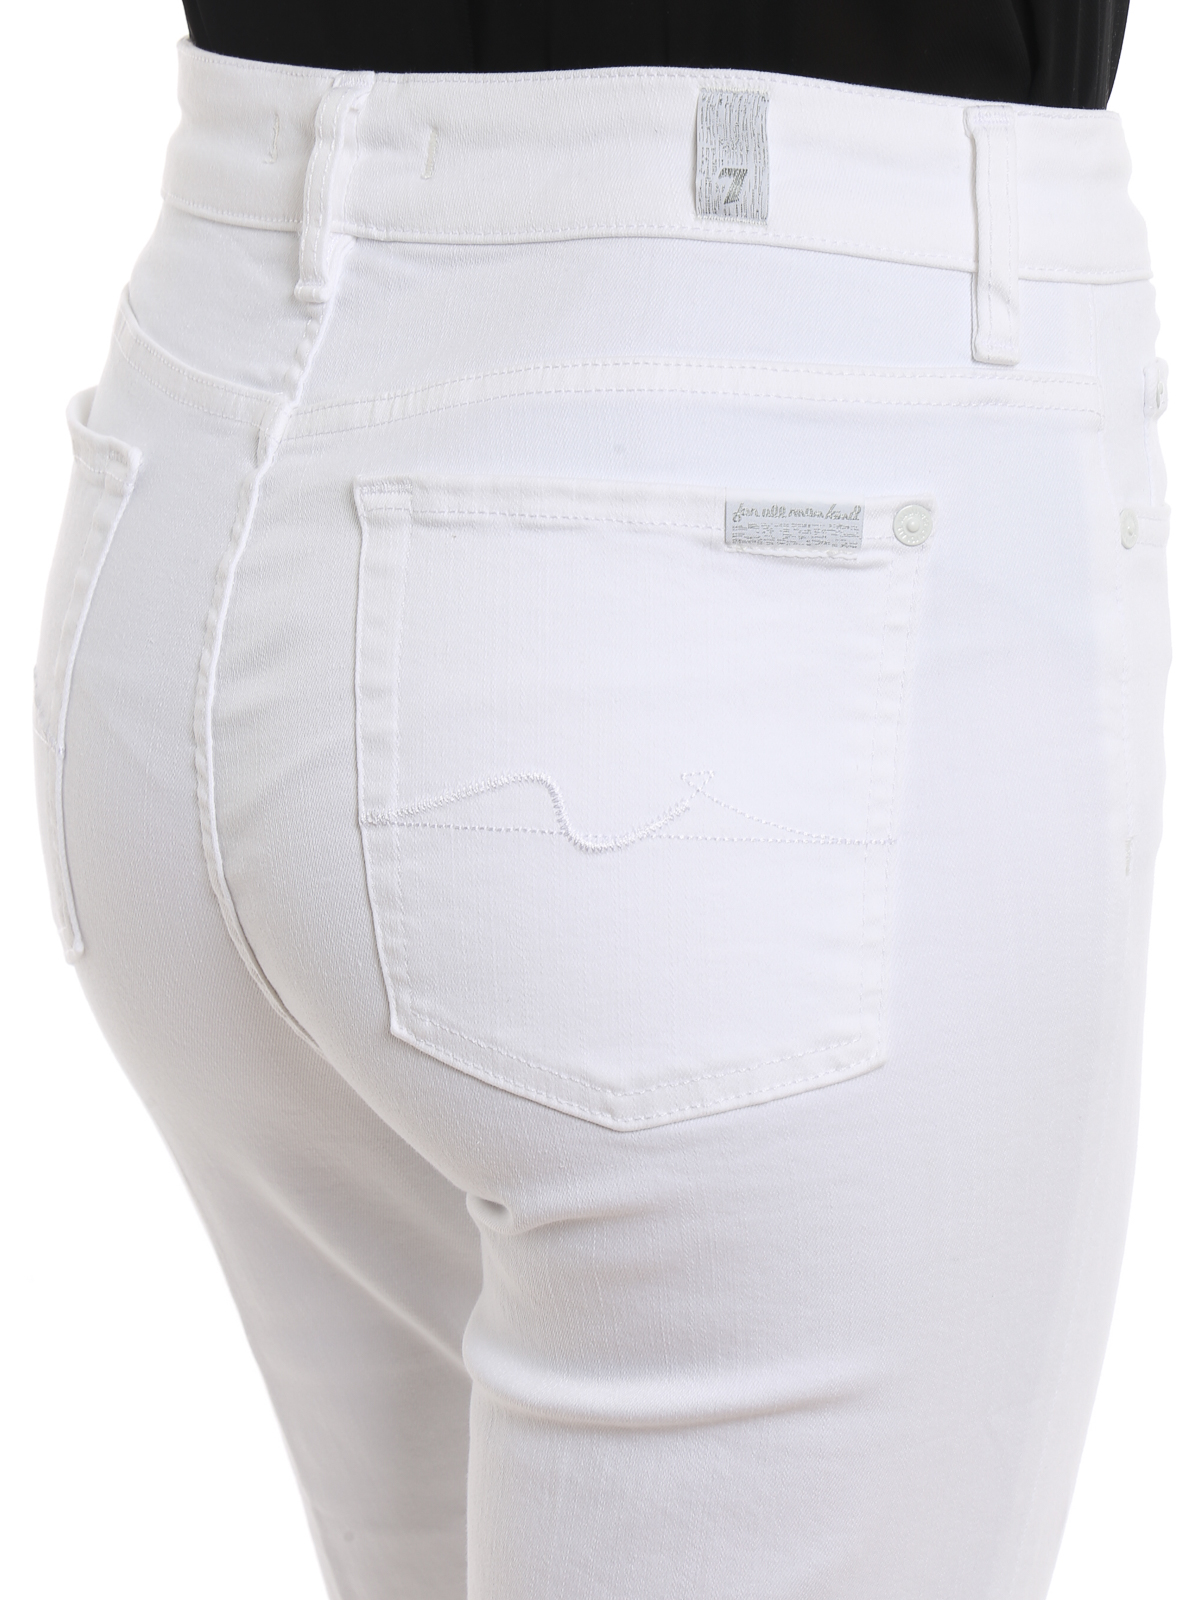 7 for mankind white jeans